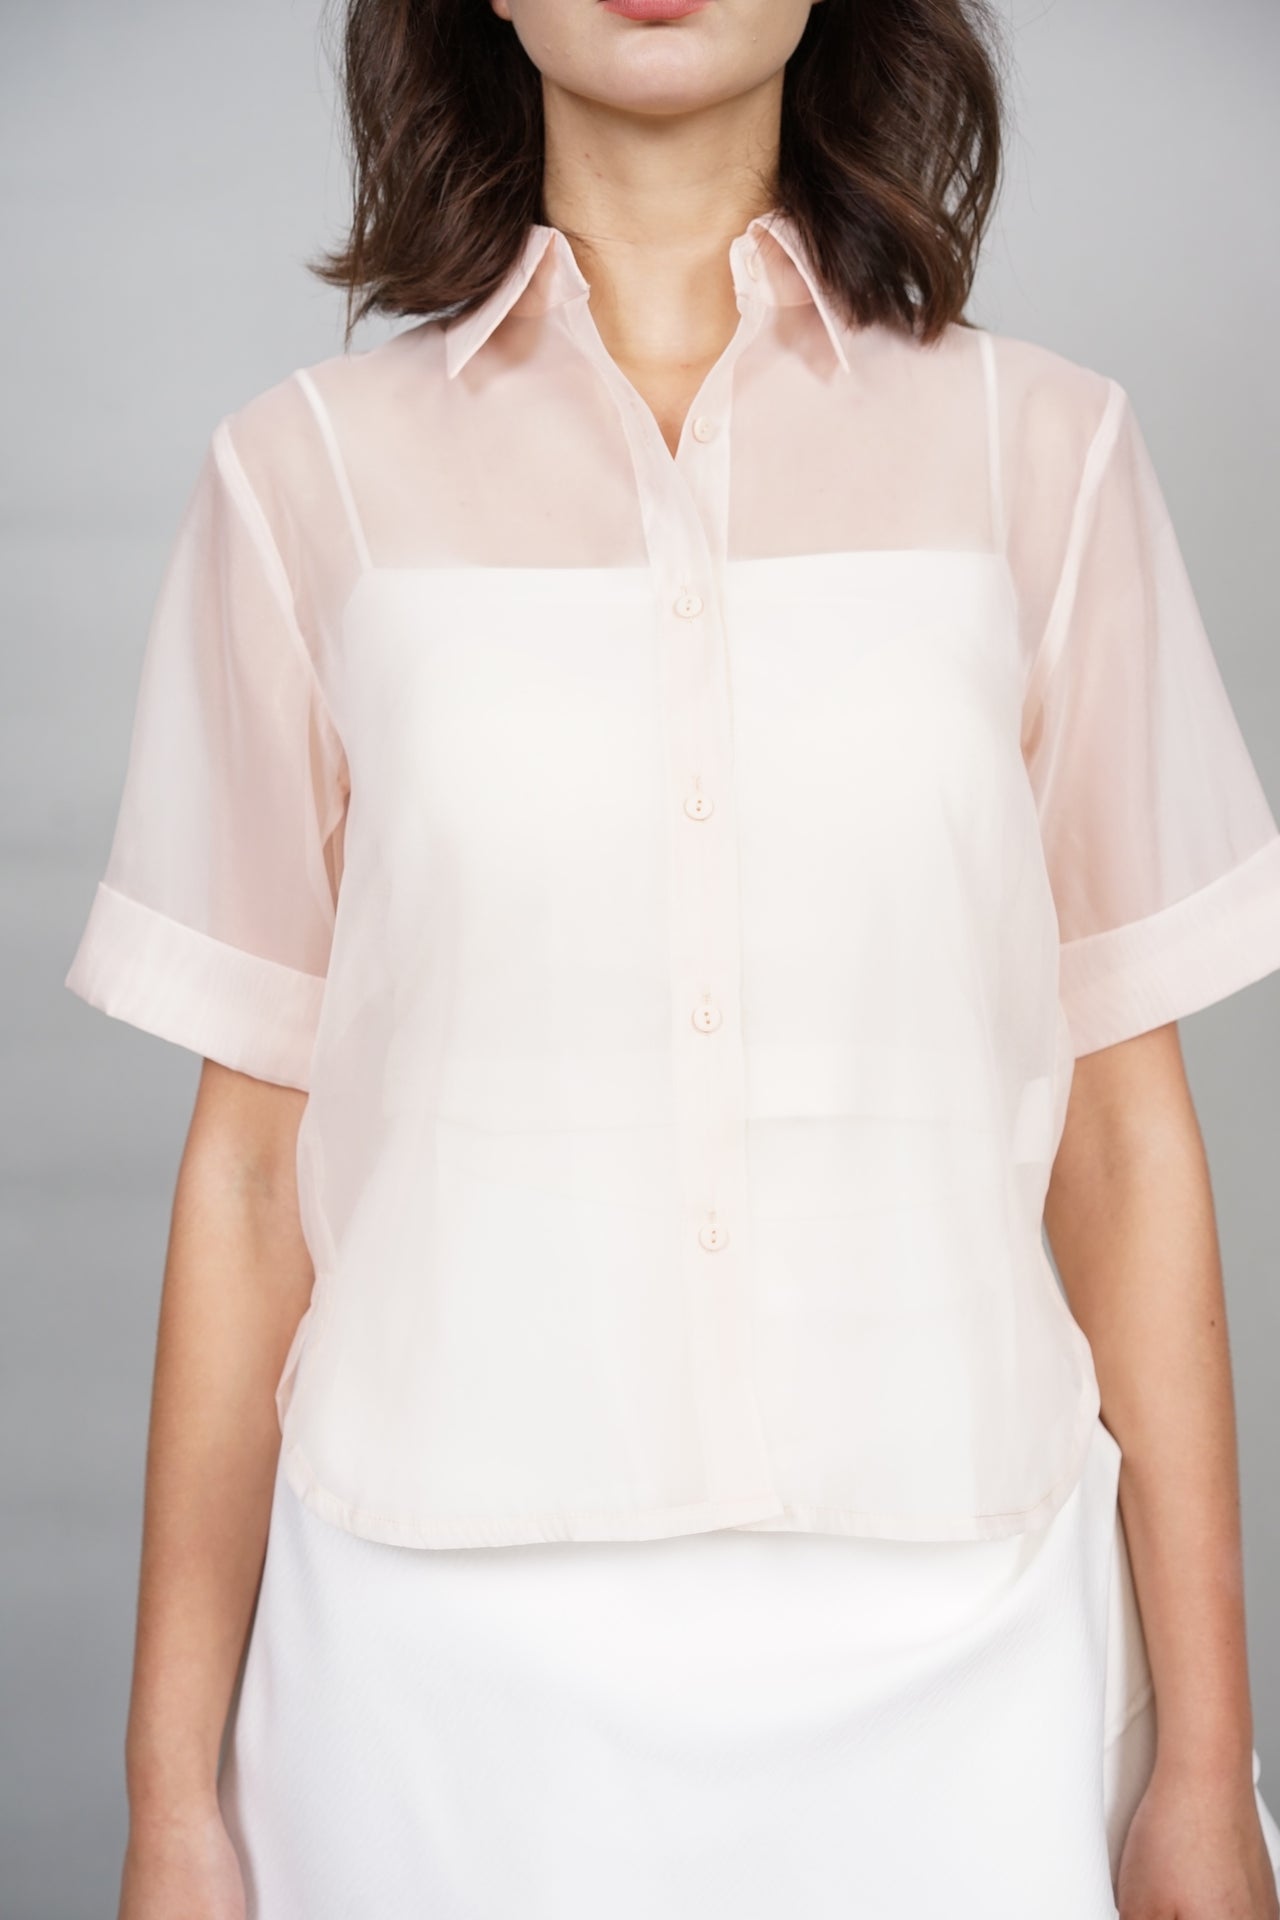 Jica Buttoned Top in Nude Pink